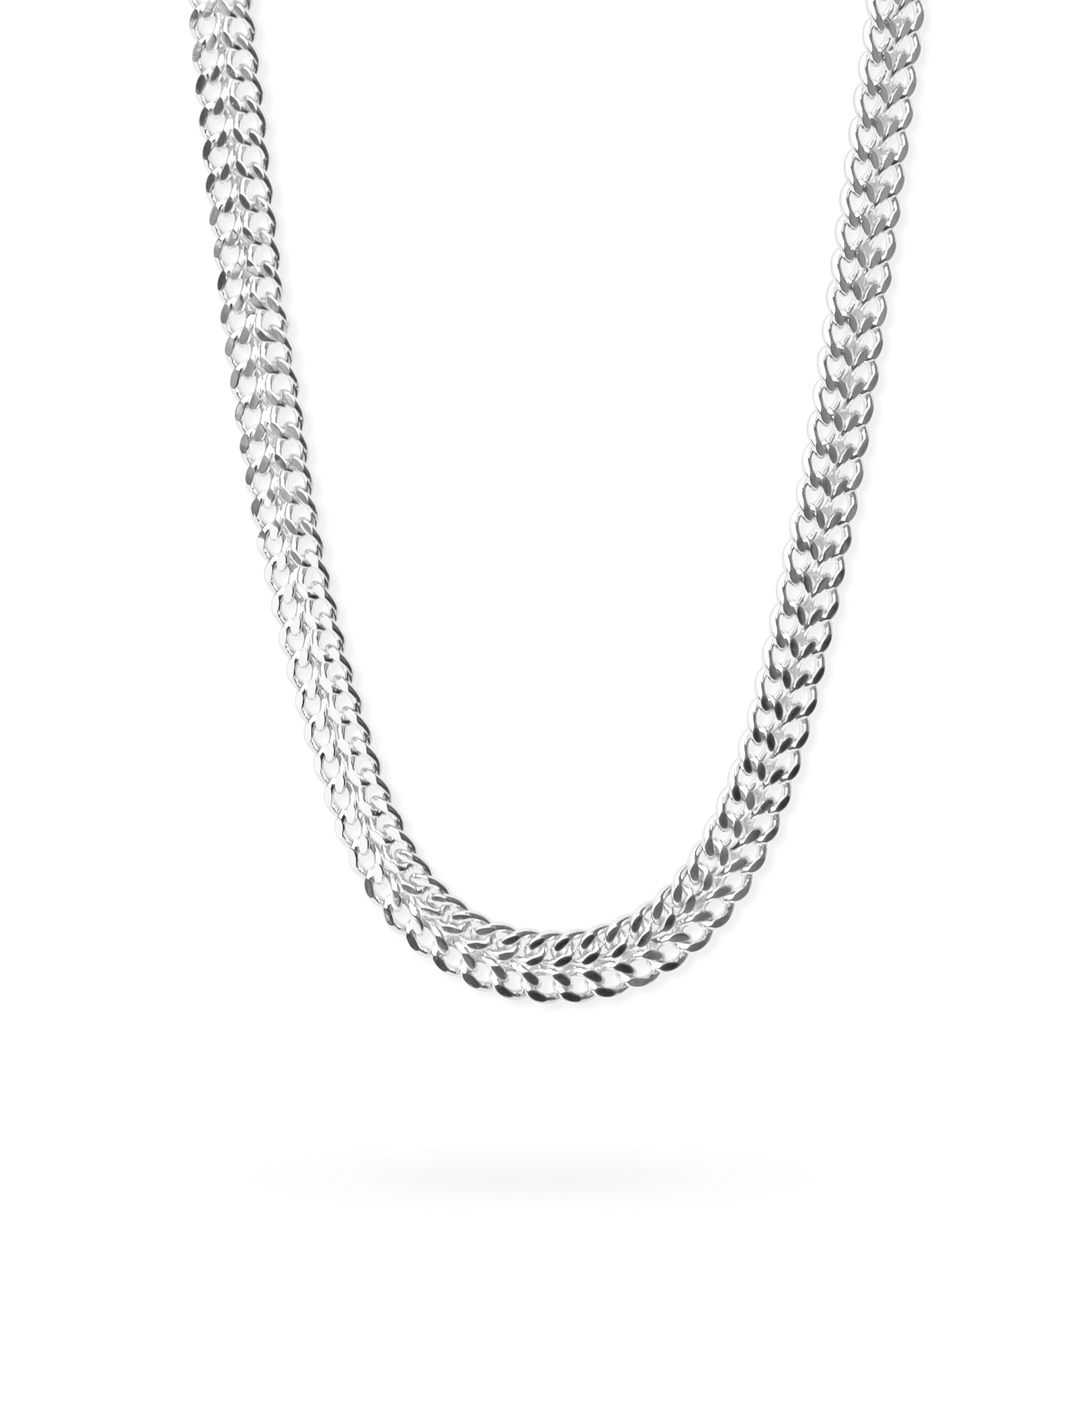 Double curb chain necklace in silver